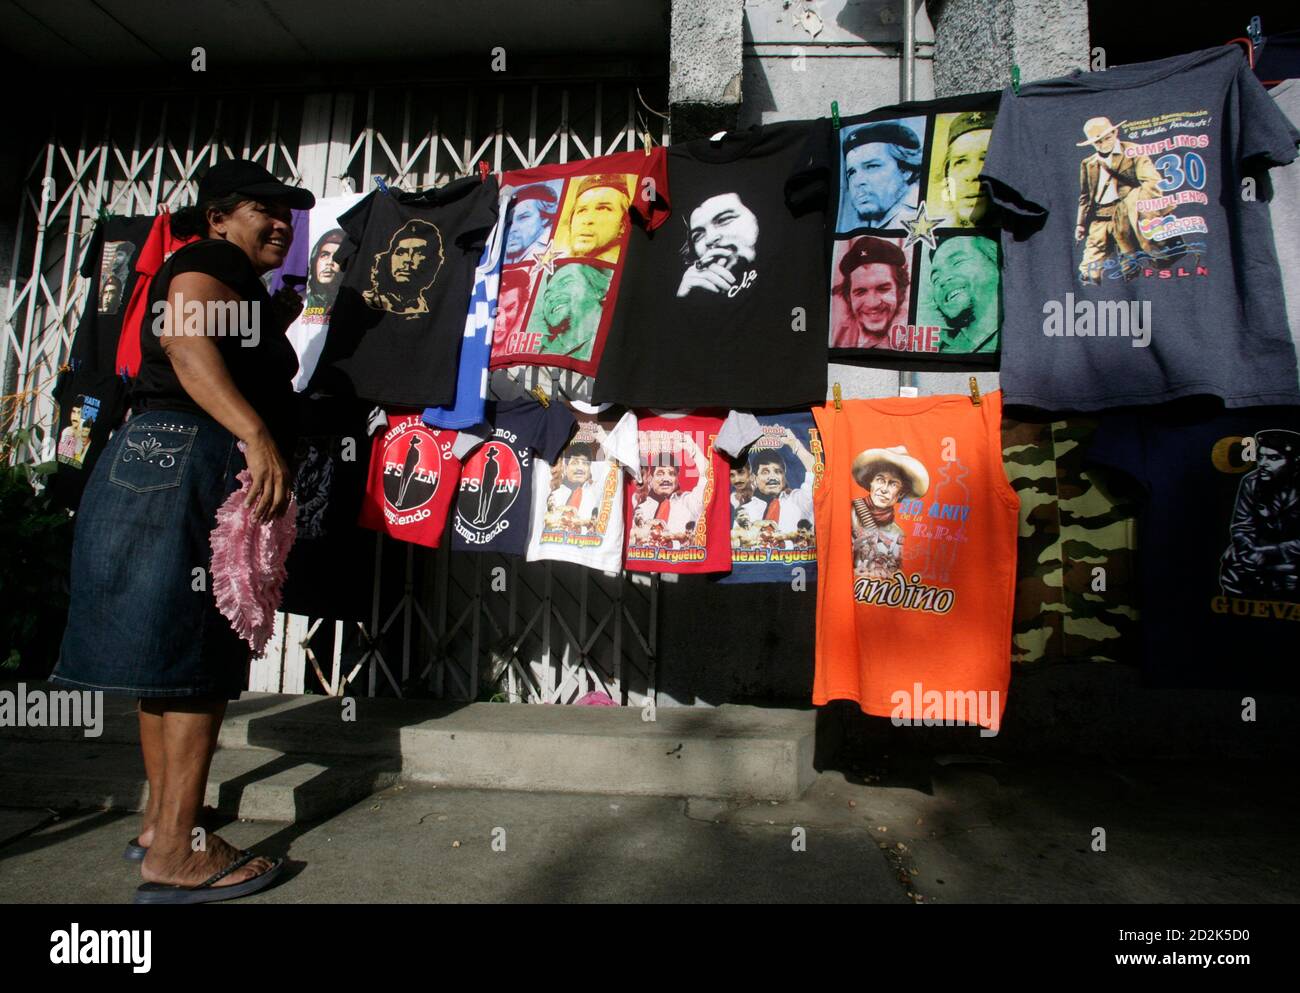 A woman sells T-shirts with the images of revolutionary leader Che Guevara  and Sandinista leader Augusto Sandino at Revolution Square in Managua July  18, 2009. Thousands of Sandinistas are preparing to celebrate